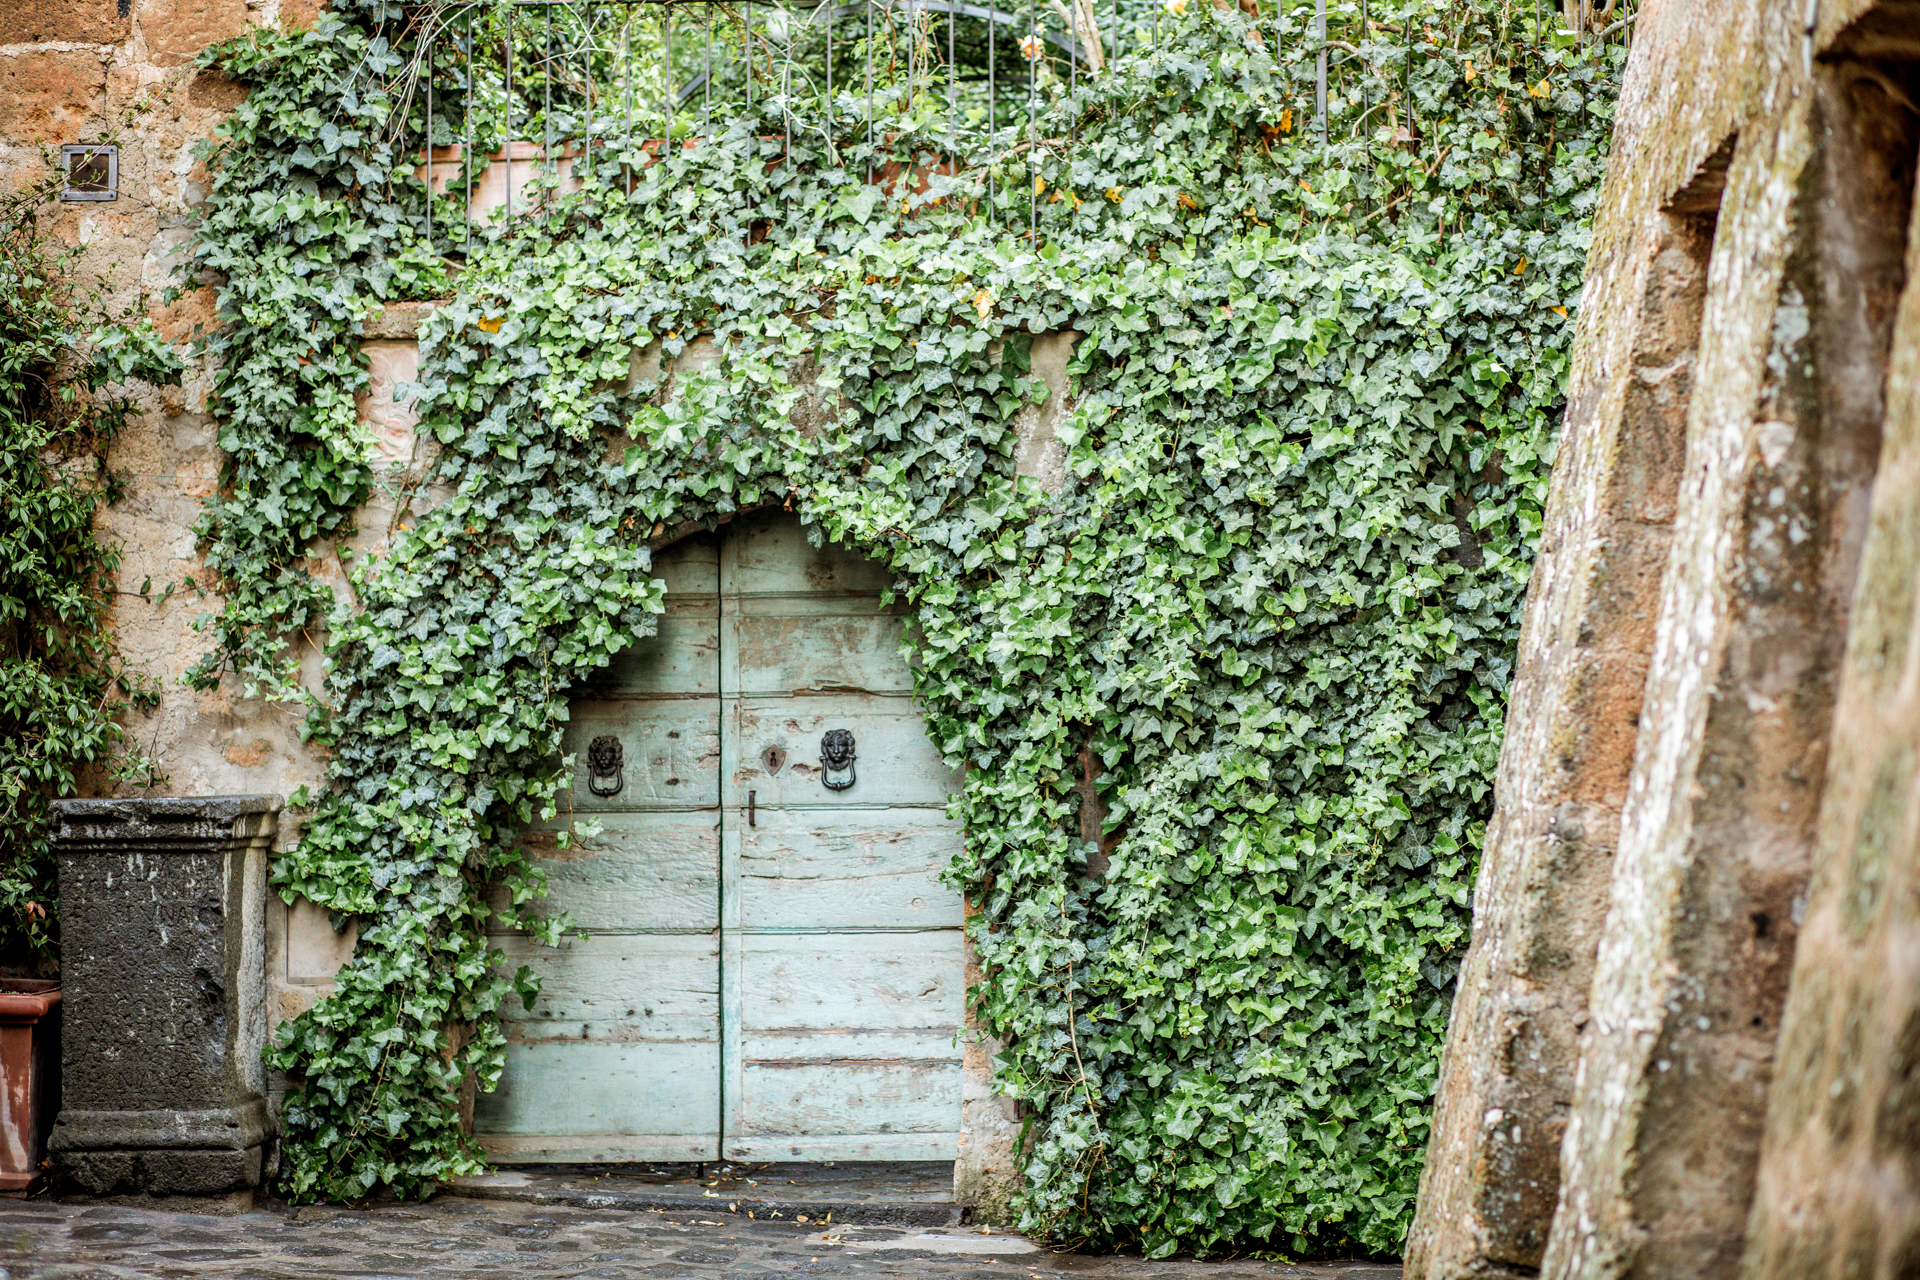 Garden Inspiration: Garden Ideas From Tuscany | Tuscany Garden Ideas by popular New England travel blogger, Shannon Shipman: image of a door covered in ivy. 